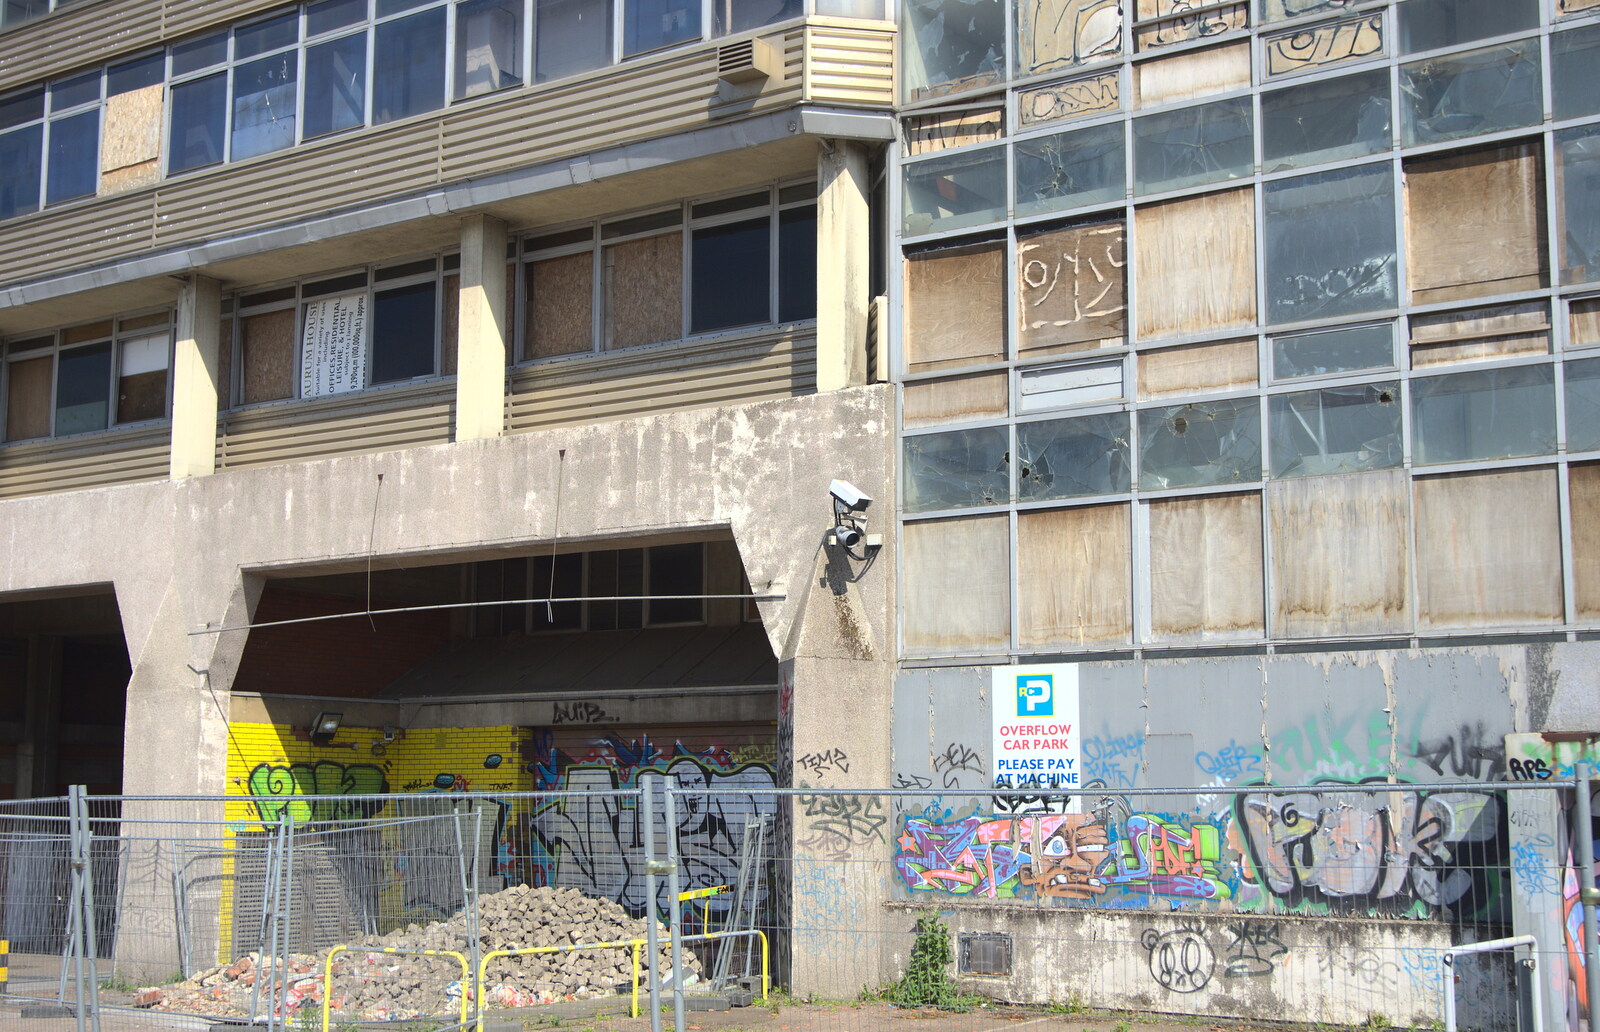 The loading bay from The Dereliction of HMSO, Botolph Street, Norwich - 26th May 2013